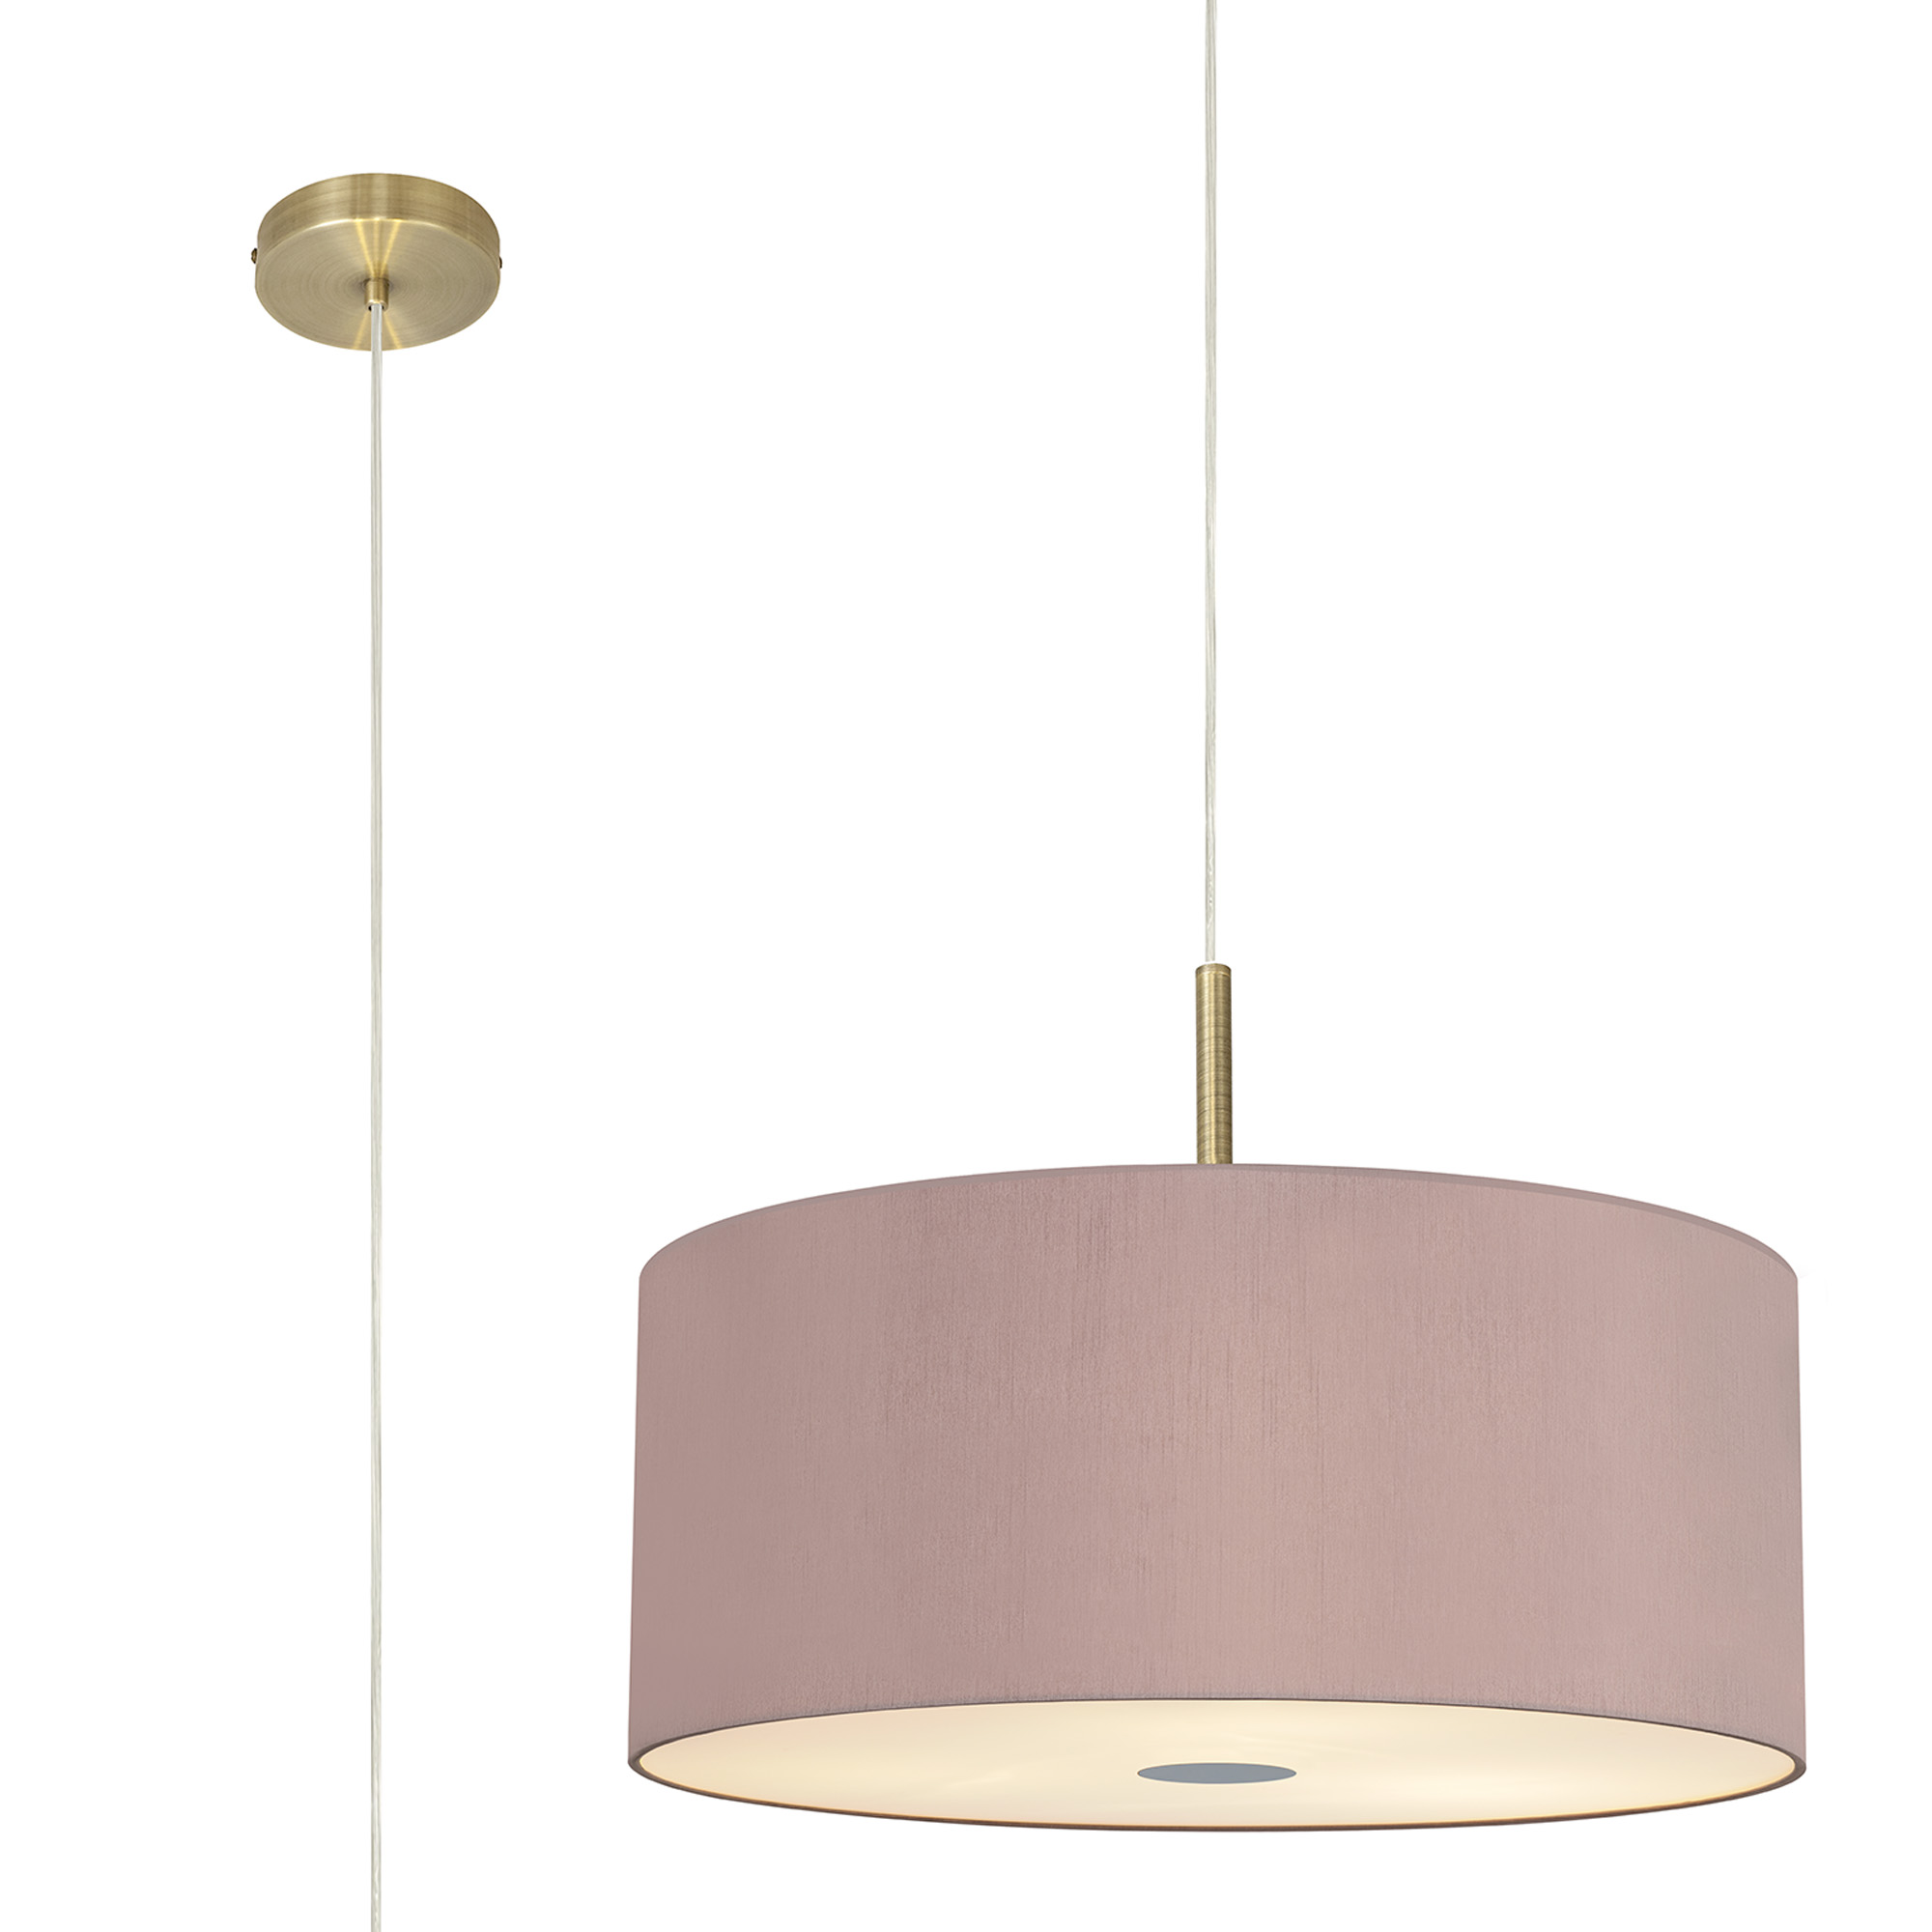 Baymont 60cm 5 Light Pendant Antique Brass; Taupe/Halo Gold; Frosted Diffuser